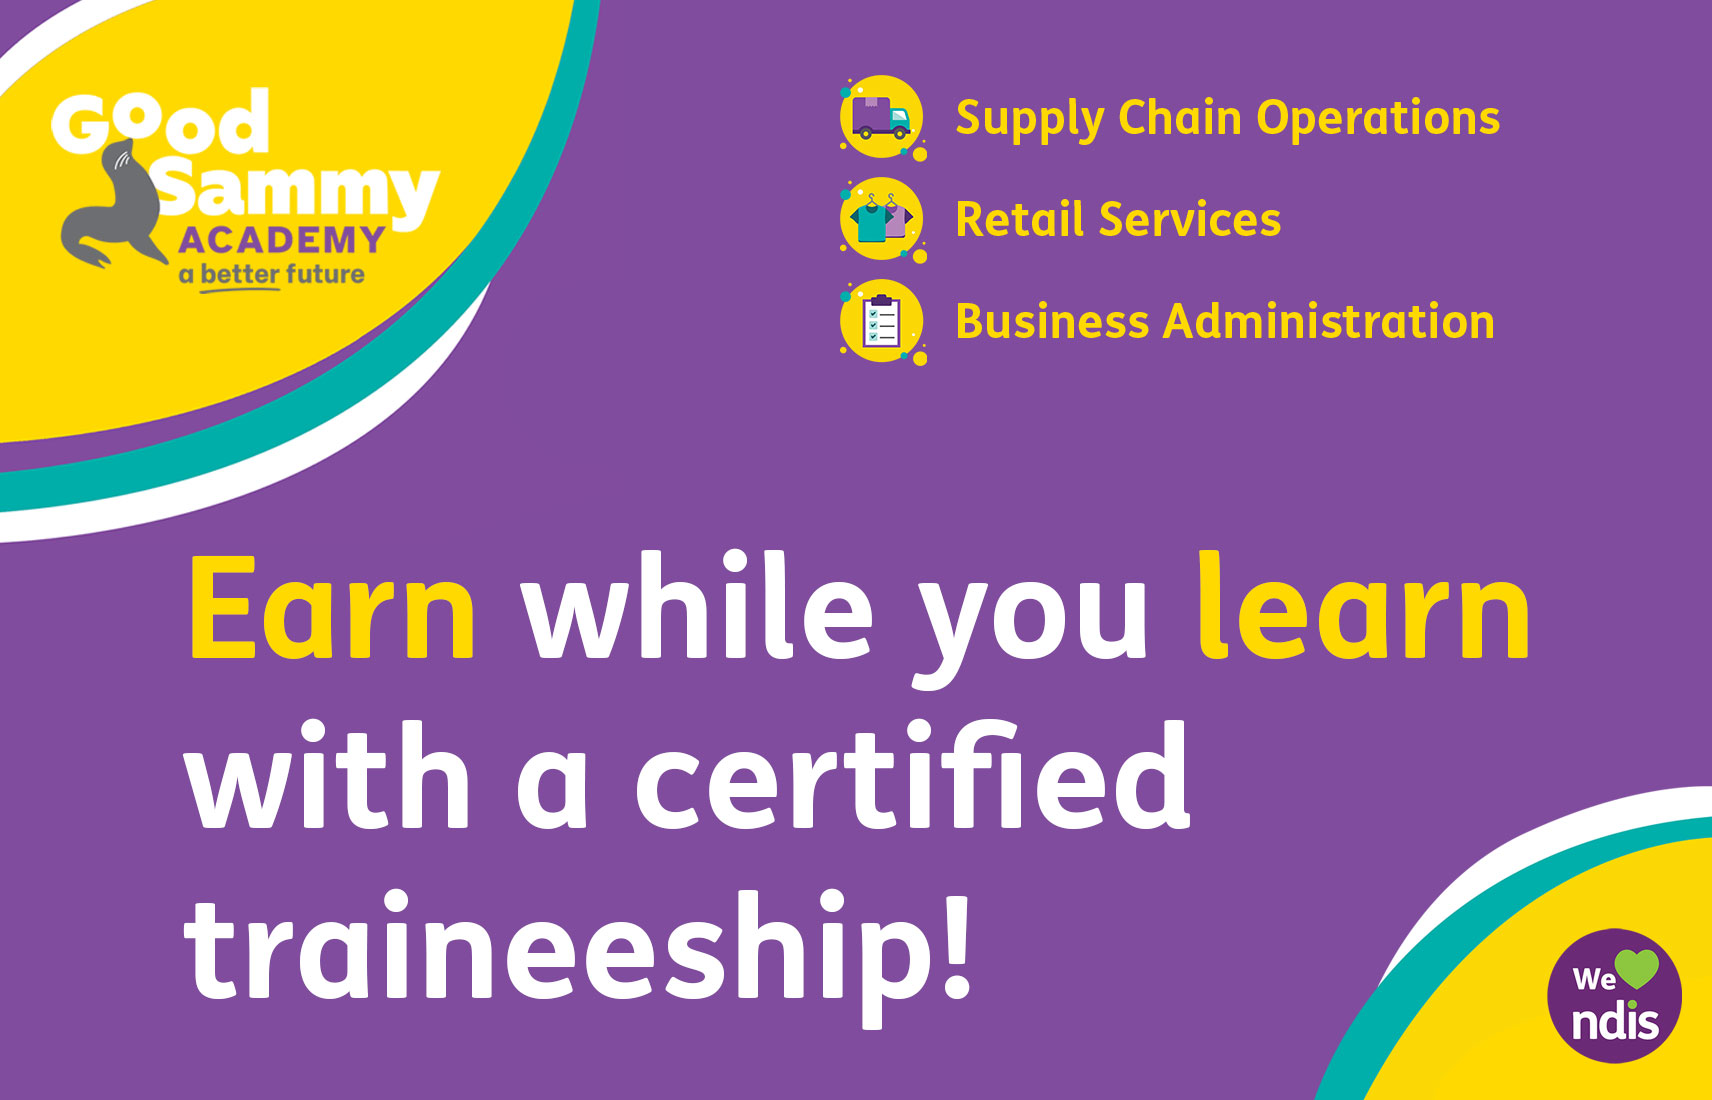 Earn while you learn, with a certified traineeship!